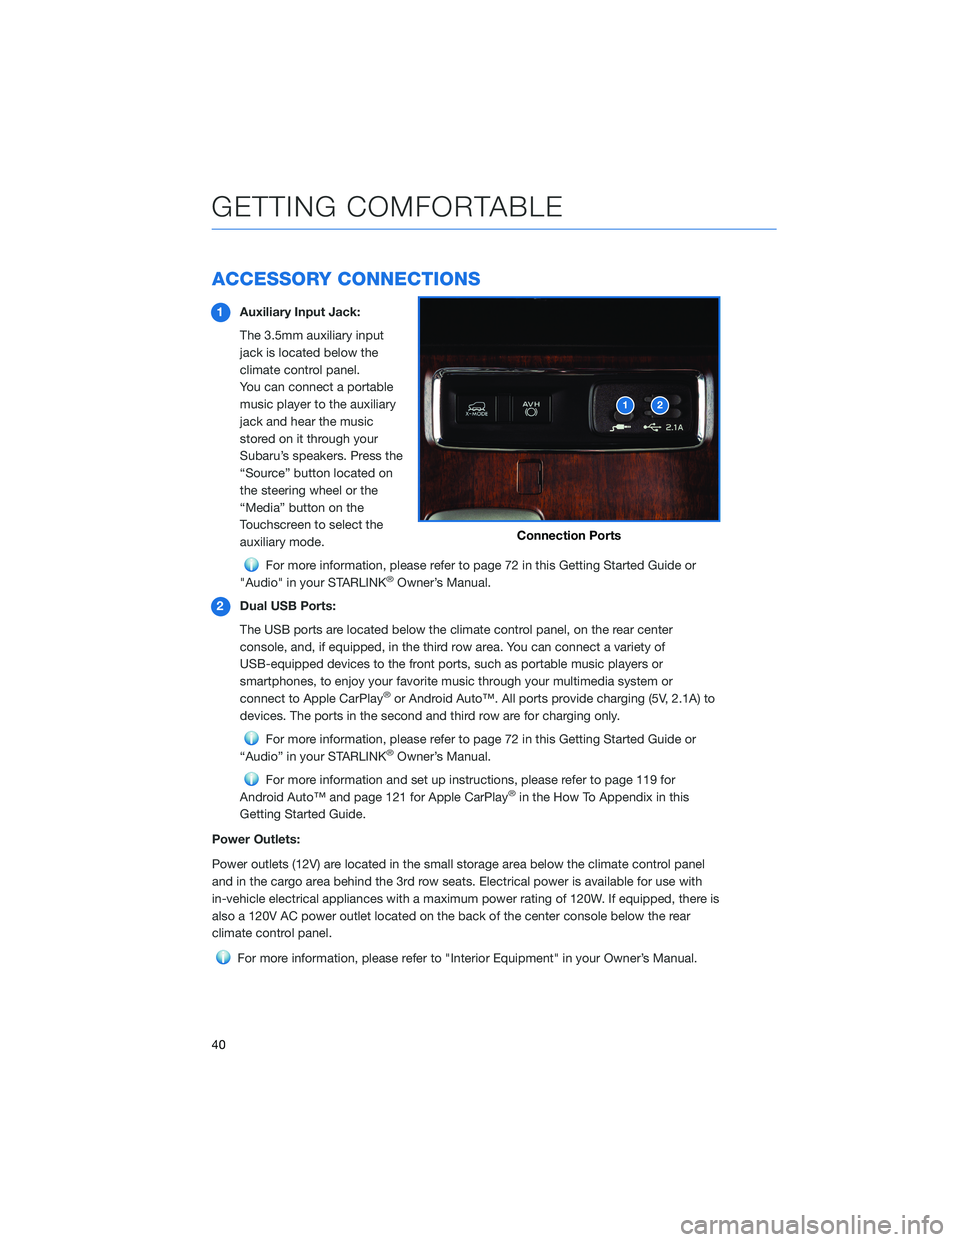 SUBARU ASCENT 2022  Getting Started Guide ACCESSORY CONNECTIONS
1Auxiliary Input Jack:
The 3.5mm auxiliary input
jack is located below the
climate control panel.
You can connect a portable
music player to the auxiliary
jack and hear the music